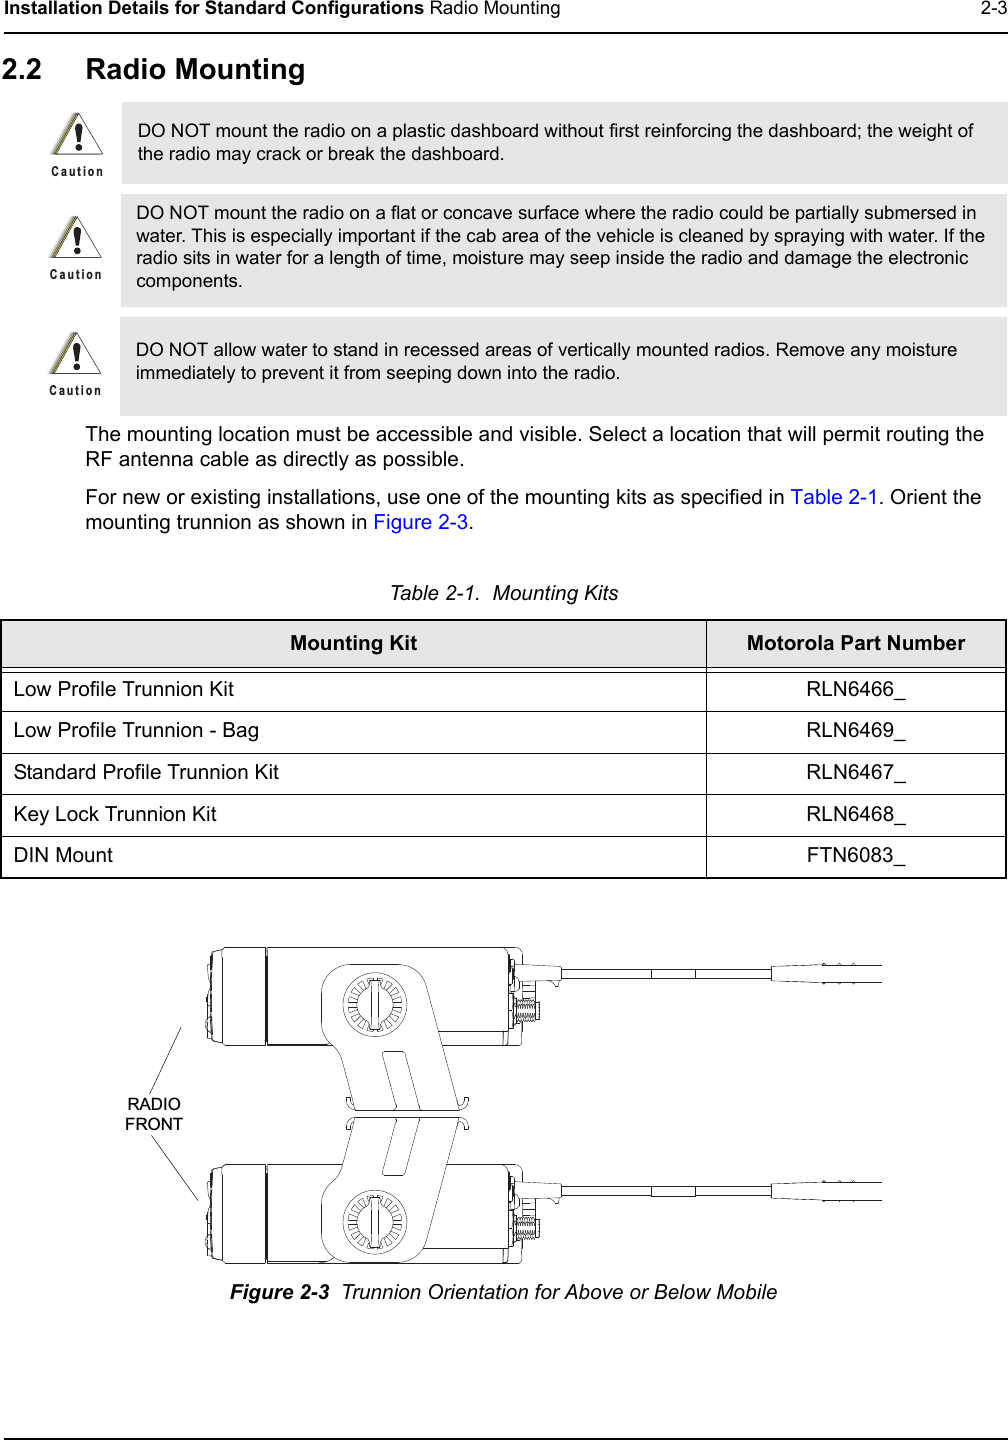 Installation Details for Standard Configurations Radio Mounting 2-32.2 Radio MountingThe mounting location must be accessible and visible. Select a location that will permit routing the RF antenna cable as directly as possible. For new or existing installations, use one of the mounting kits as specified in Table 2-1. Orient the mounting trunnion as shown in Figure 2-3.DO NOT mount the radio on a plastic dashboard without first reinforcing the dashboard; the weight of the radio may crack or break the dashboard.DO NOT mount the radio on a flat or concave surface where the radio could be partially submersed in water. This is especially important if the cab area of the vehicle is cleaned by spraying with water. If the radio sits in water for a length of time, moisture may seep inside the radio and damage the electronic components.DO NOT allow water to stand in recessed areas of vertically mounted radios. Remove any moisture immediately to prevent it from seeping down into the radio.Table 2-1.  Mounting KitsMounting Kit Motorola Part NumberLow Profile Trunnion Kit RLN6466_Low Profile Trunnion - Bag RLN6469_Standard Profile Trunnion Kit RLN6467_Key Lock Trunnion Kit RLN6468_DIN Mount FTN6083_Figure 2-3  Trunnion Orientation for Above or Below MobileC a u t i o nC a u t i o nC a u t i o nRADIOFRONT